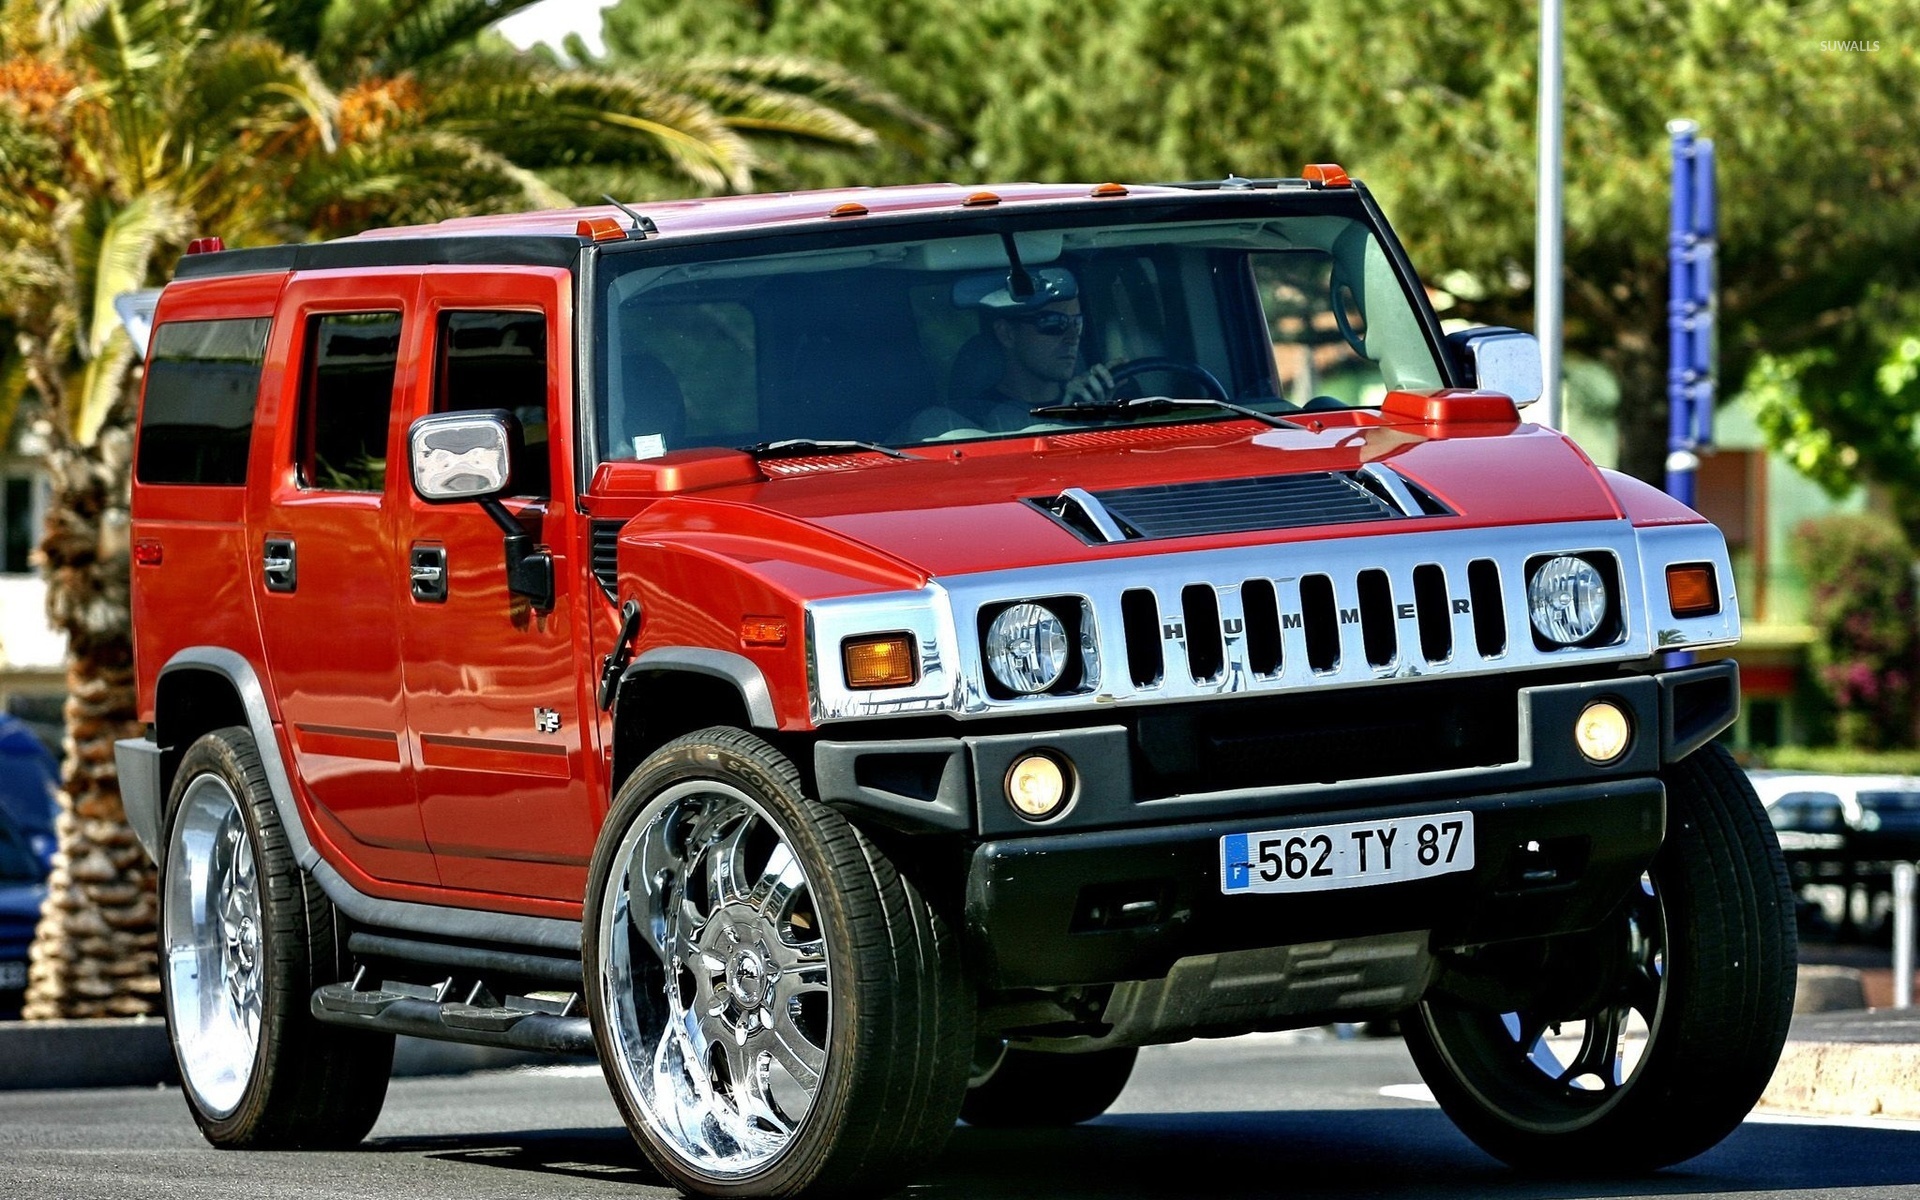 553  Hummer car hd wallpapers free download For iPad Home Secreen